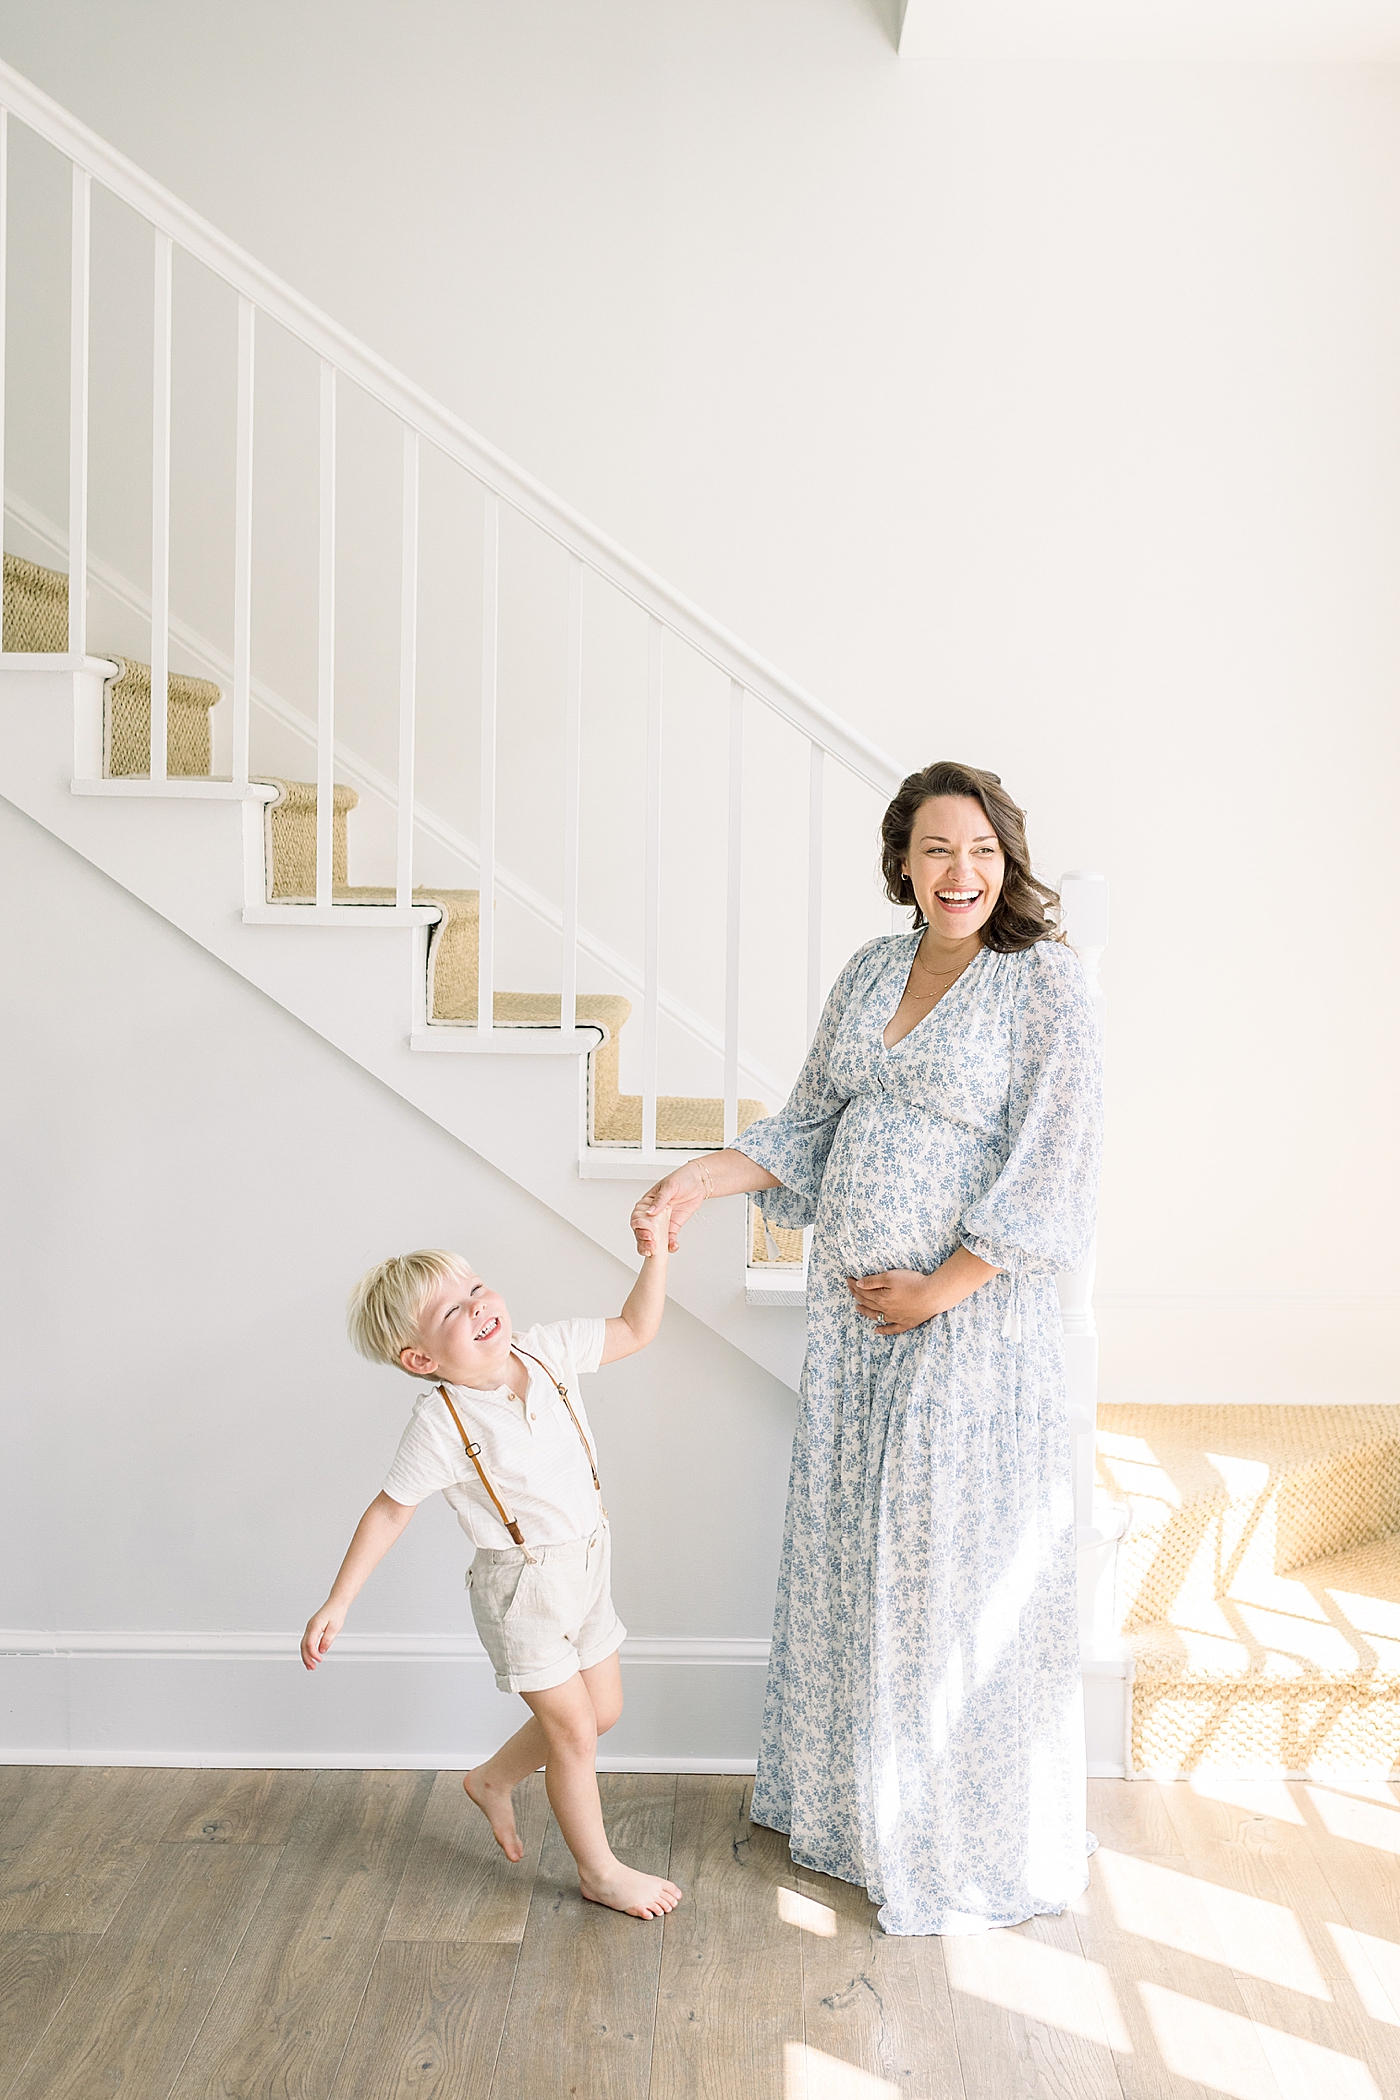 Mother and son smiling, laughing, dancing in an all white entry way next to a staircase | Image by Caitlyn Motycka 